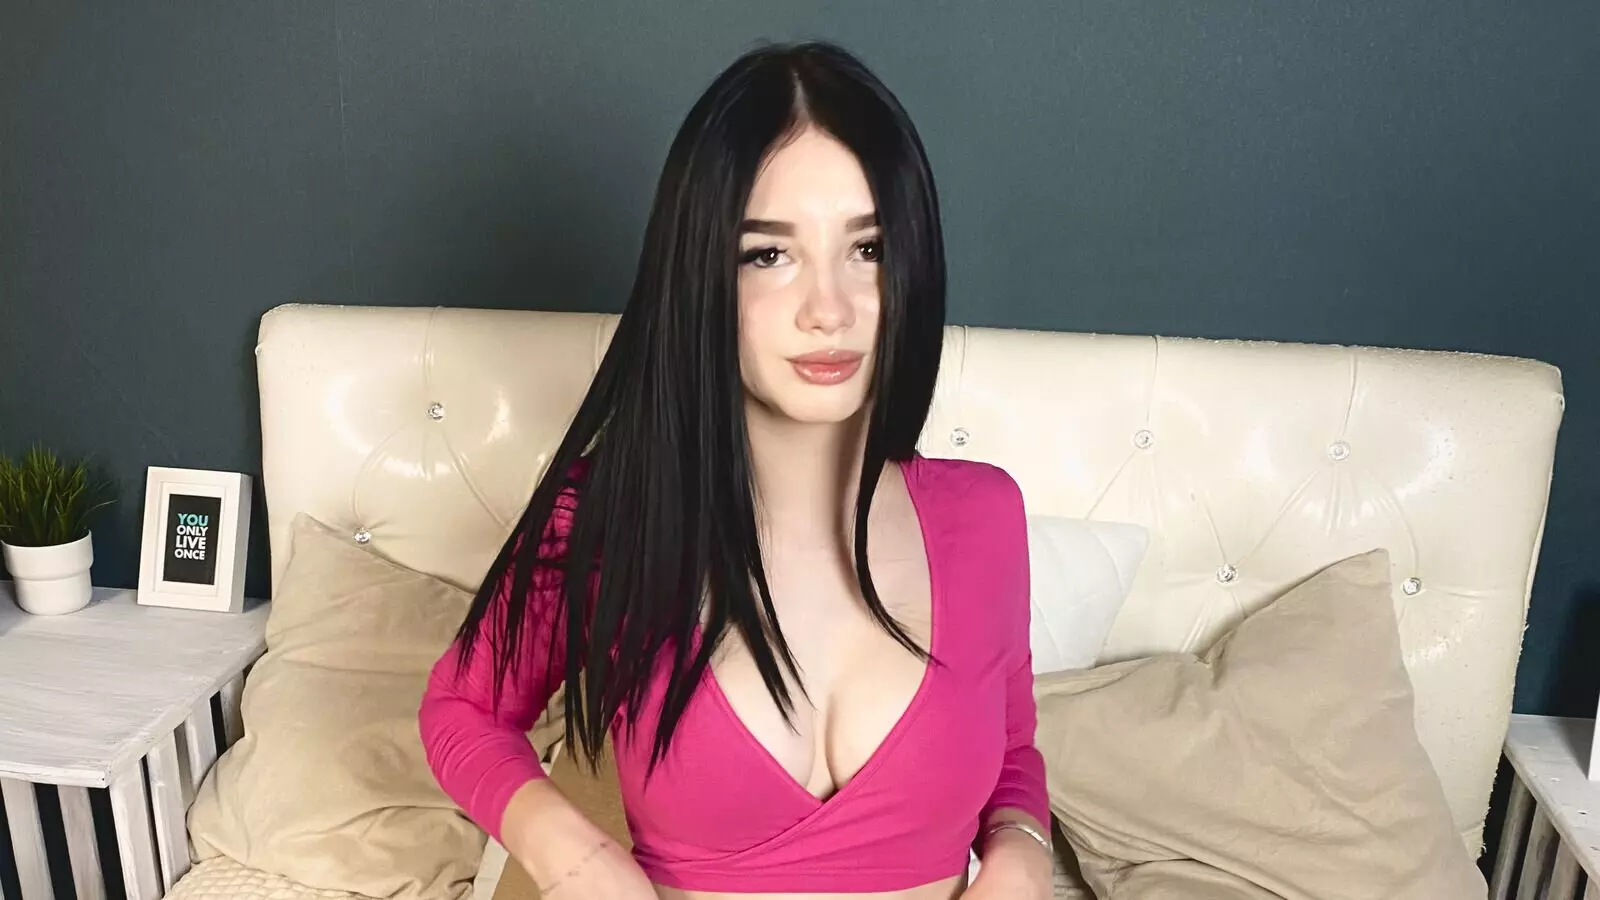  RELATED VIDEOS - WEBCAM NiaSanches STRIPS AND MASTURBATES